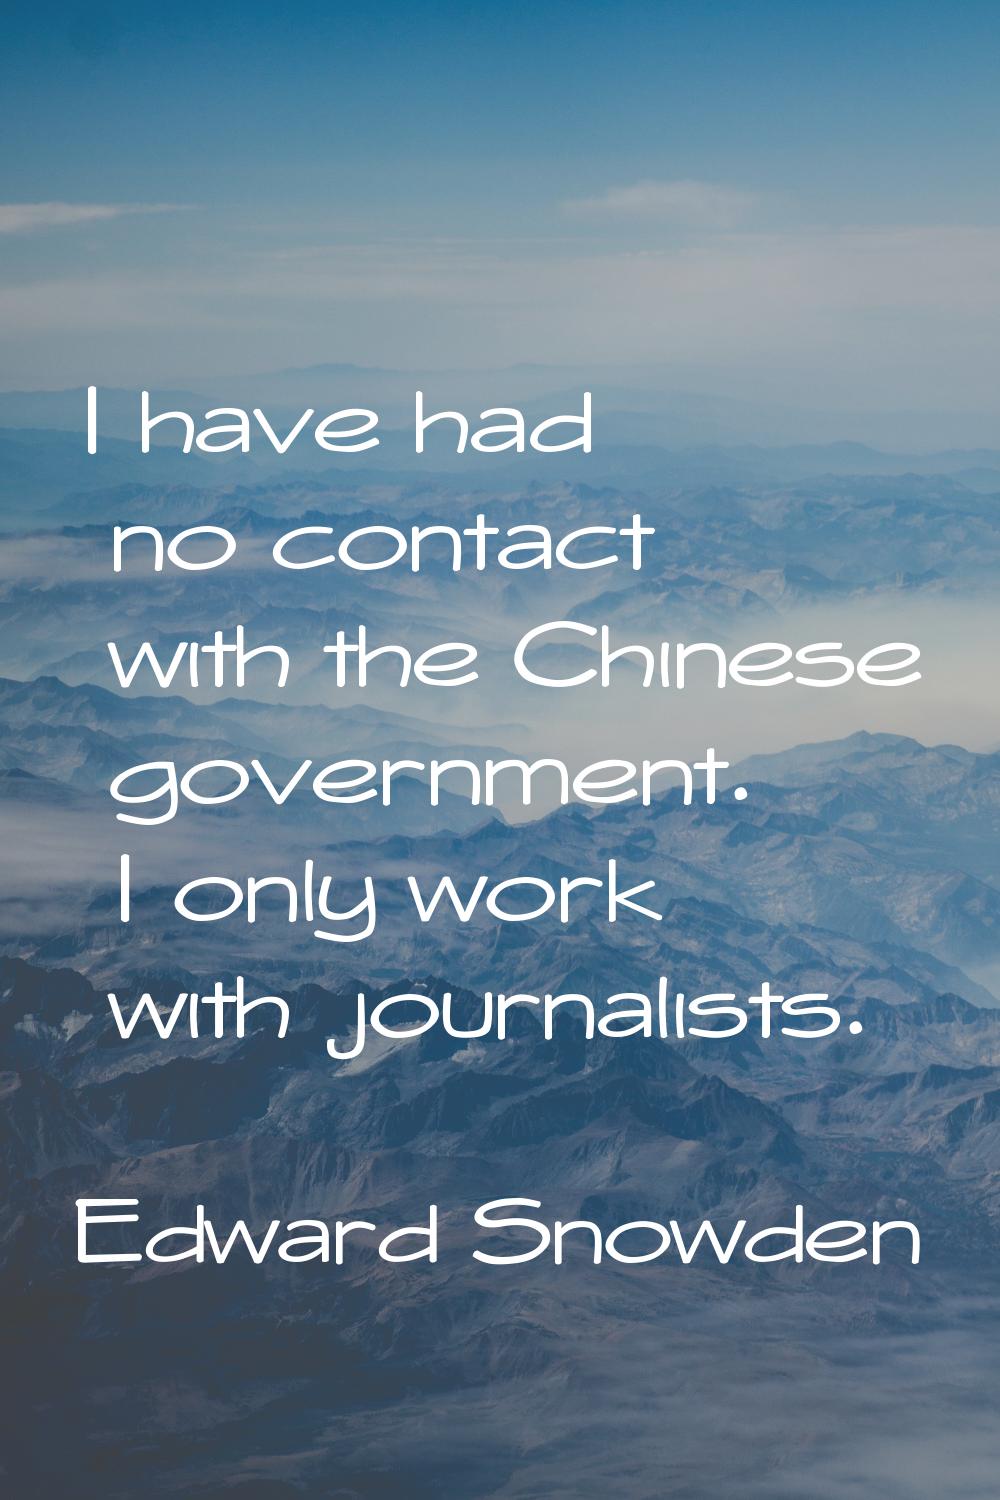 I have had no contact with the Chinese government. I only work with journalists.